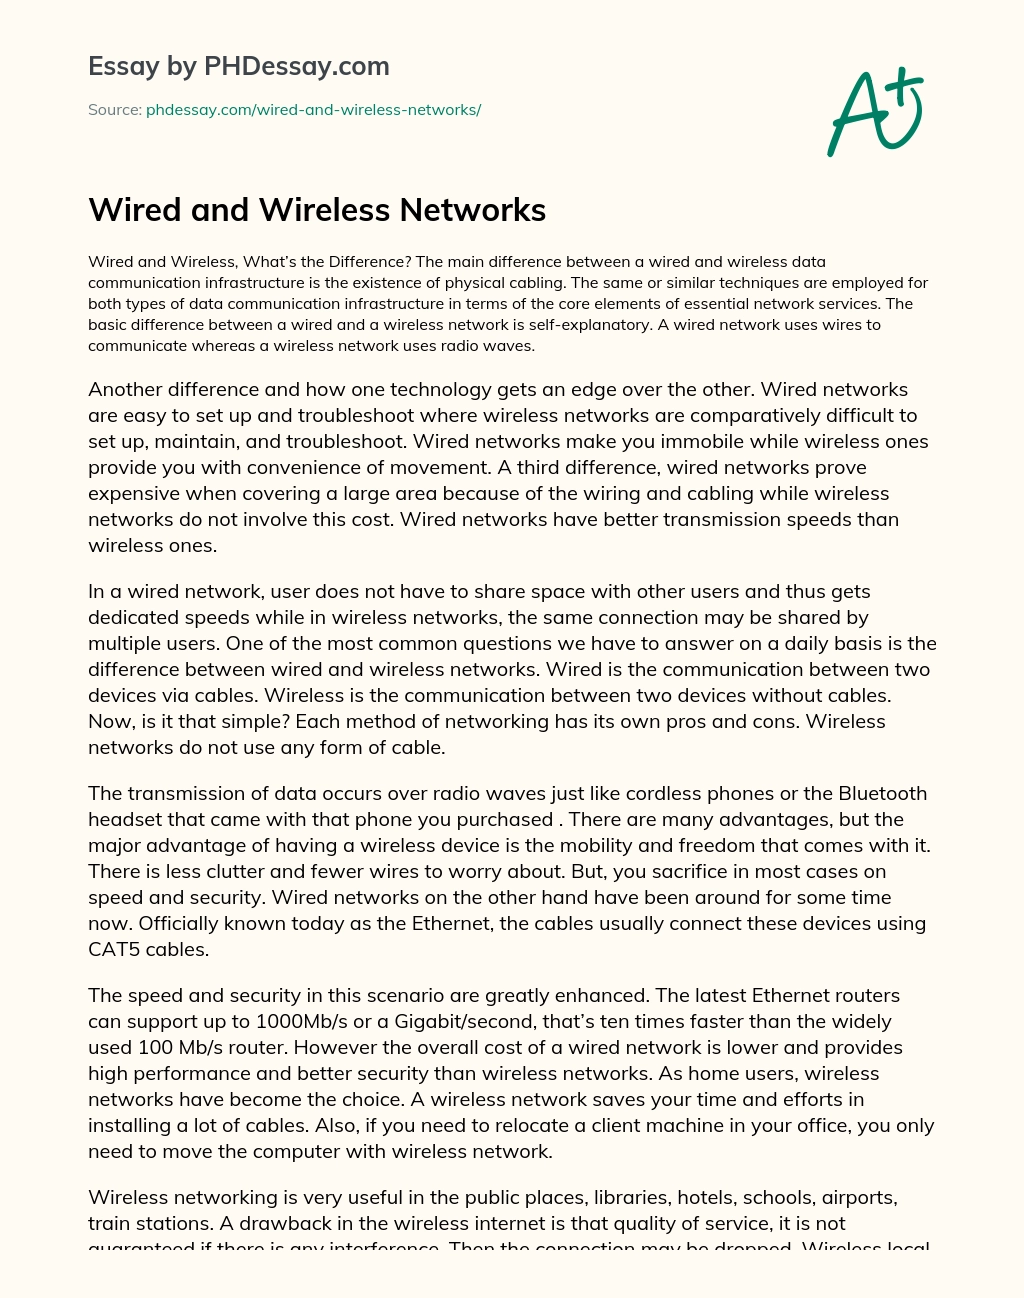 Wired and Wireless Networks essay